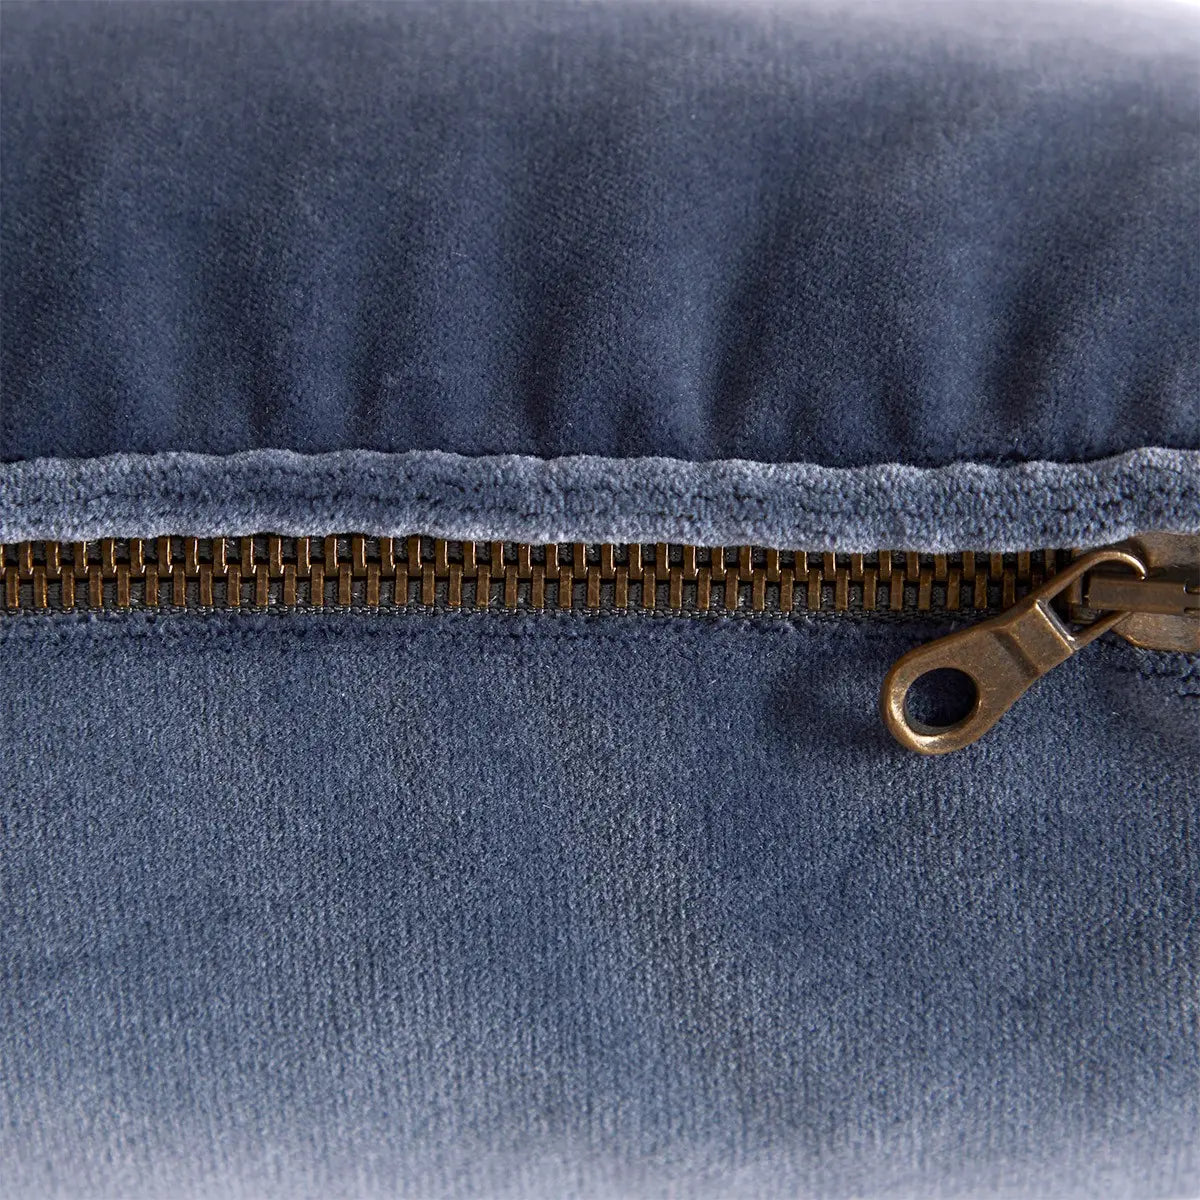 Zipper detail on Yves Delorme Divan Decorative Pillow in Mystere